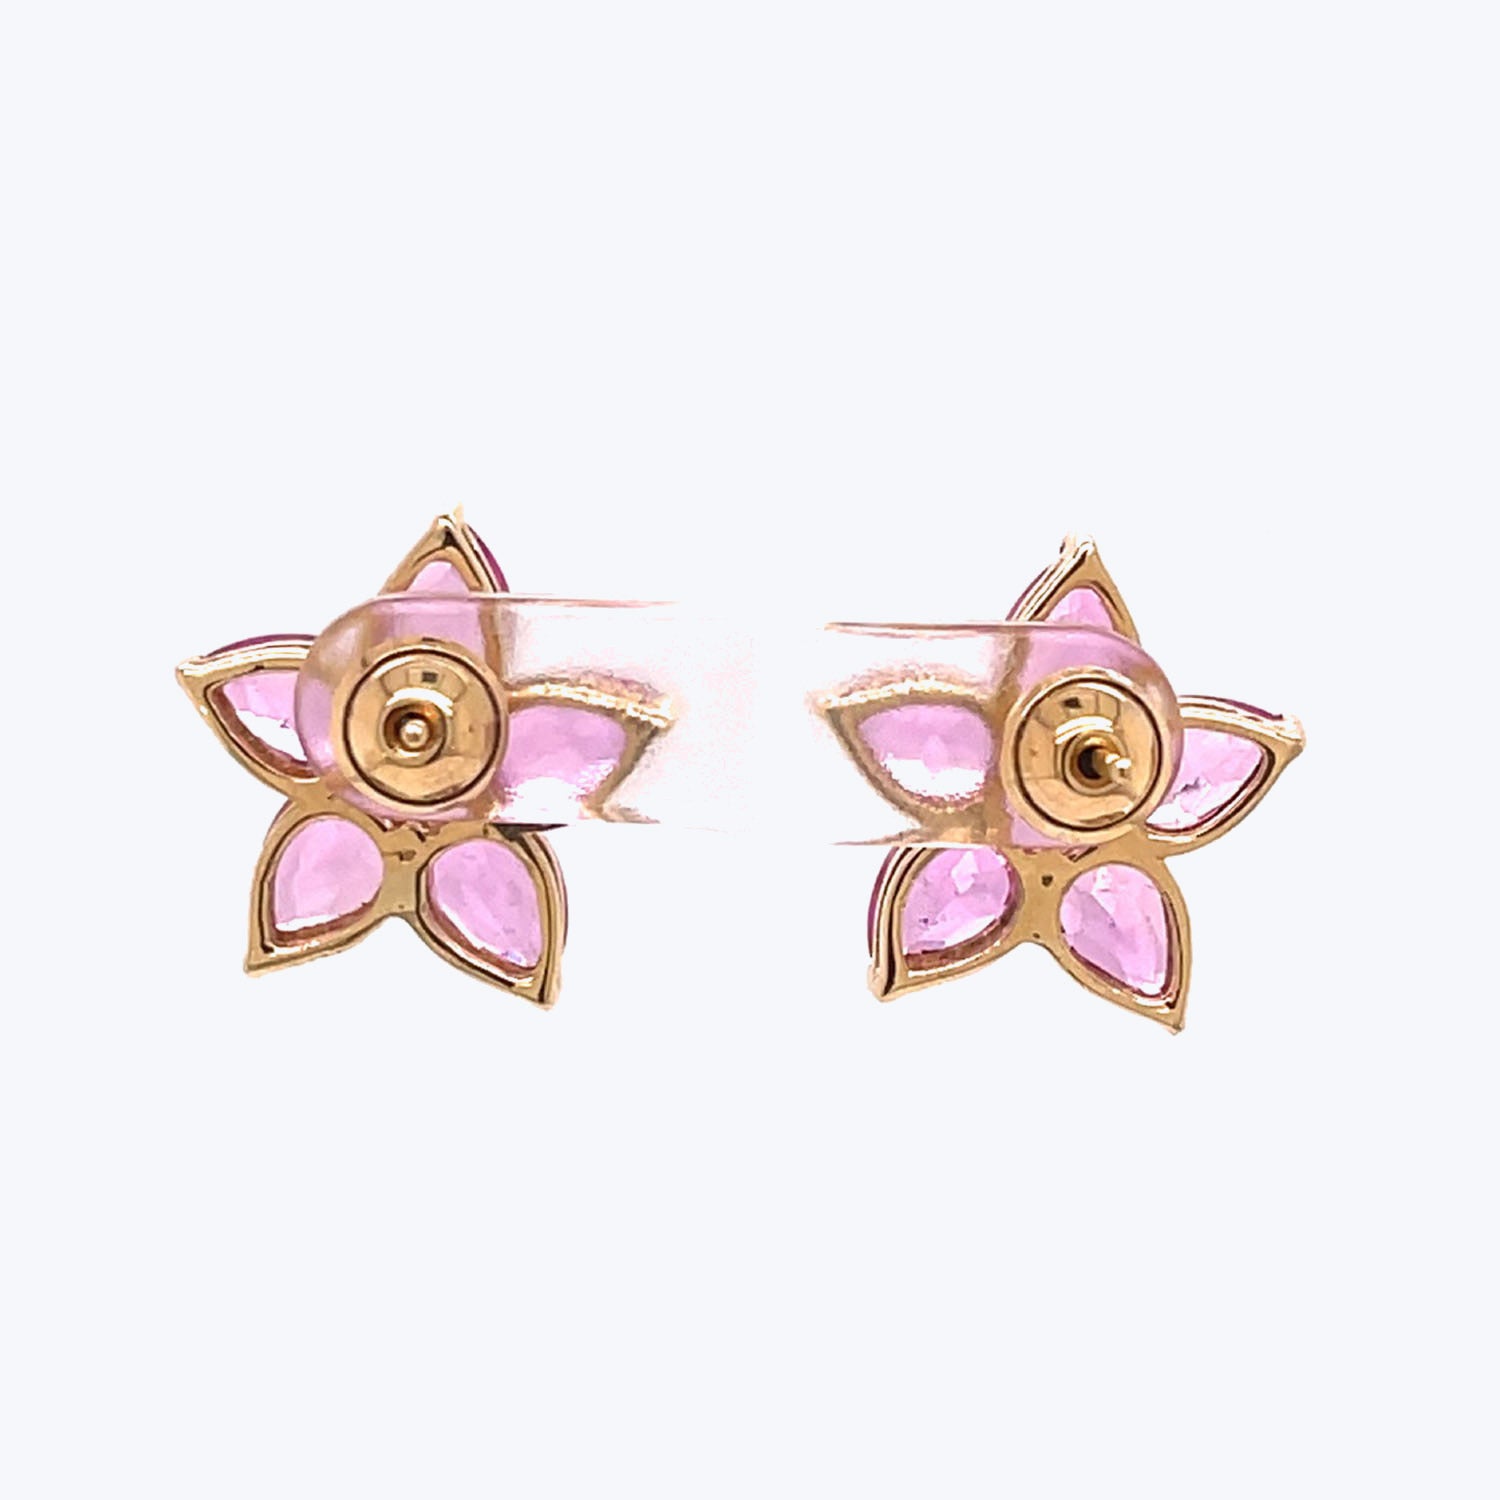 Gold-tone flower earrings with pink petals and circular stigmas.